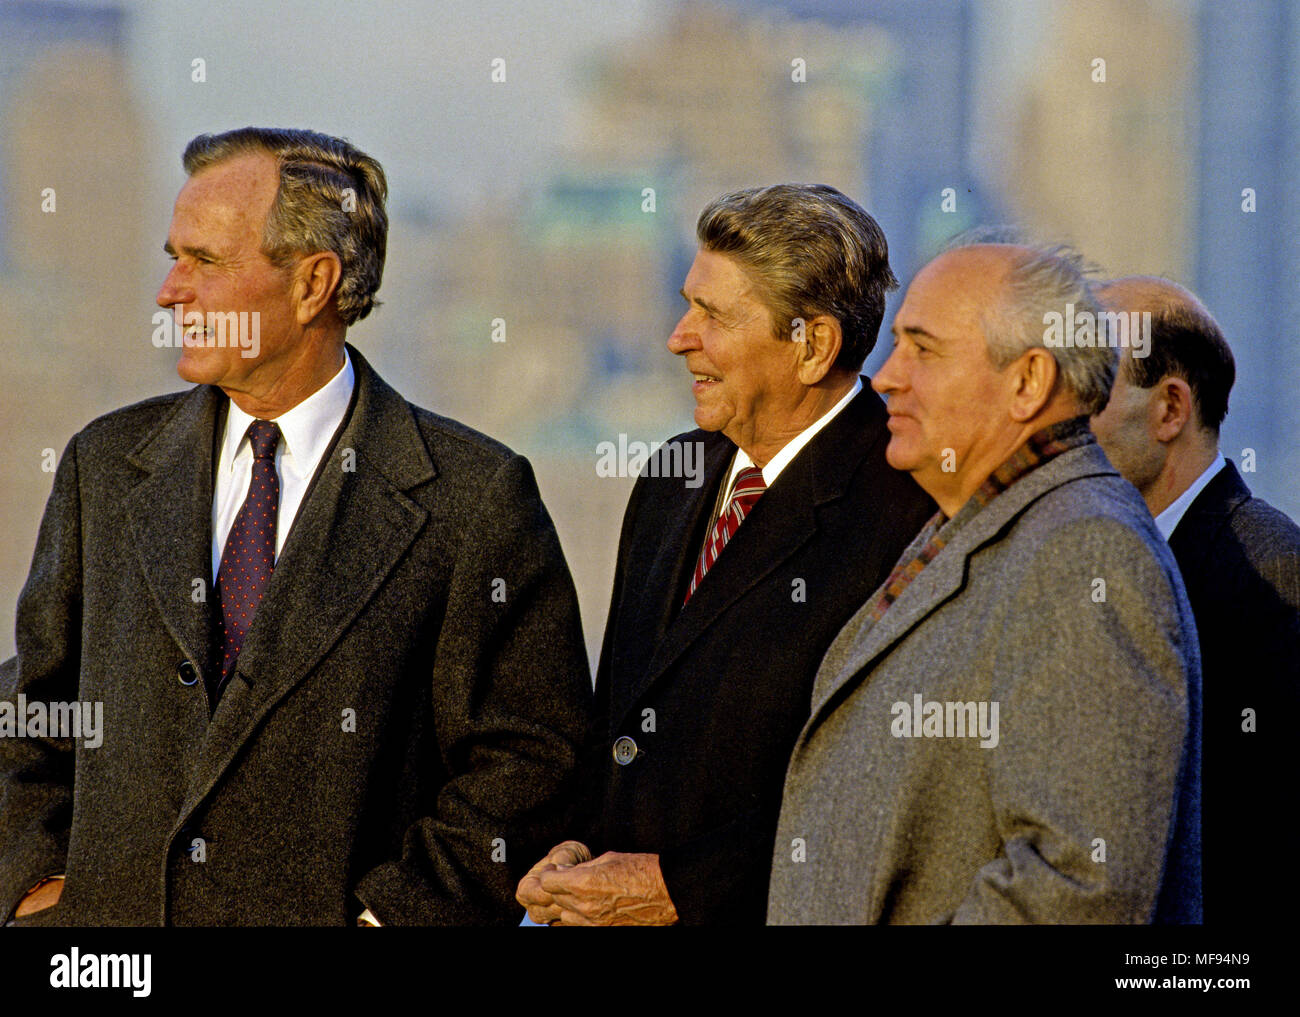 New York, New York, USA. 18th May, 2013. United States President-elect George H.W. Bush, left, and U.S. President Ronald Reagan, center, and USSR General Secretary Mikhail Gorbachev, right, view the New York City skyline after meeting on Governor's Island, New York on December 7, 1988.Credit: Arnie Sachs/CNP. Credit: Arnie Sachs/CNP/ZUMAPRESS.com/Alamy Live News Stock Photo